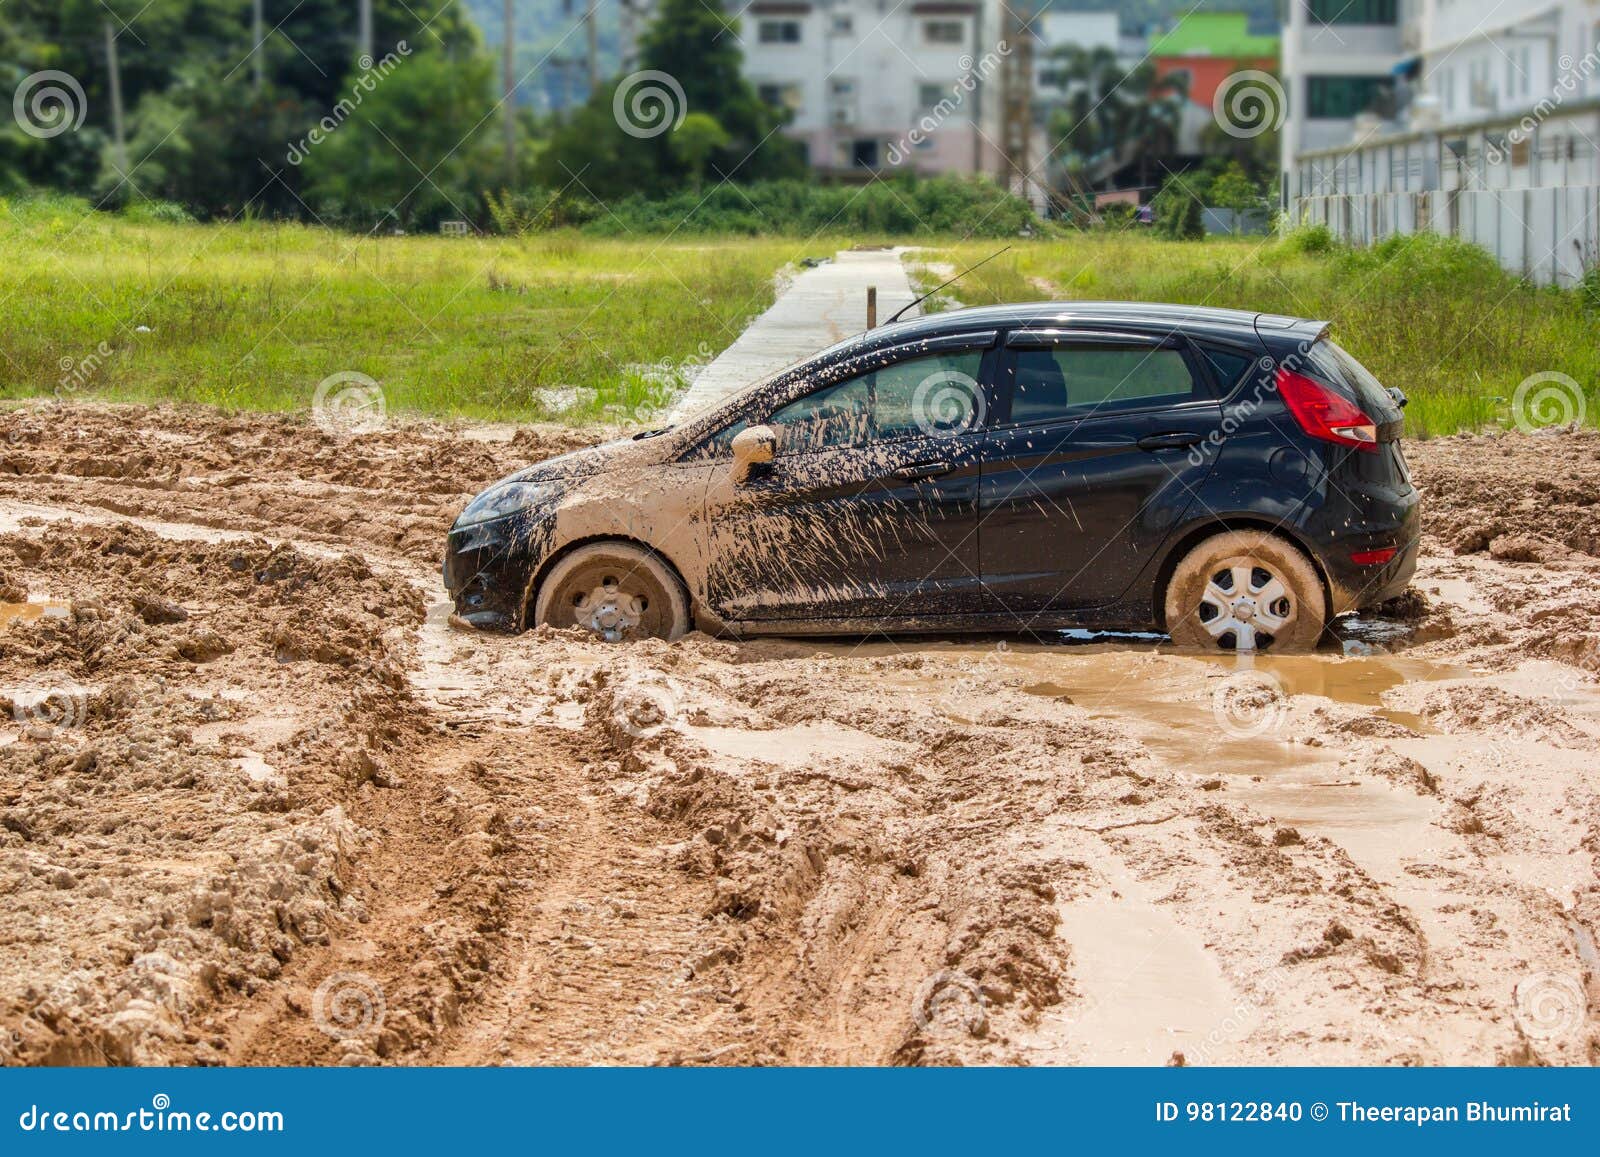 1,853 Car Stuck Mud Photos - Free & Royalty-Free Stock Photos from Dreamstime